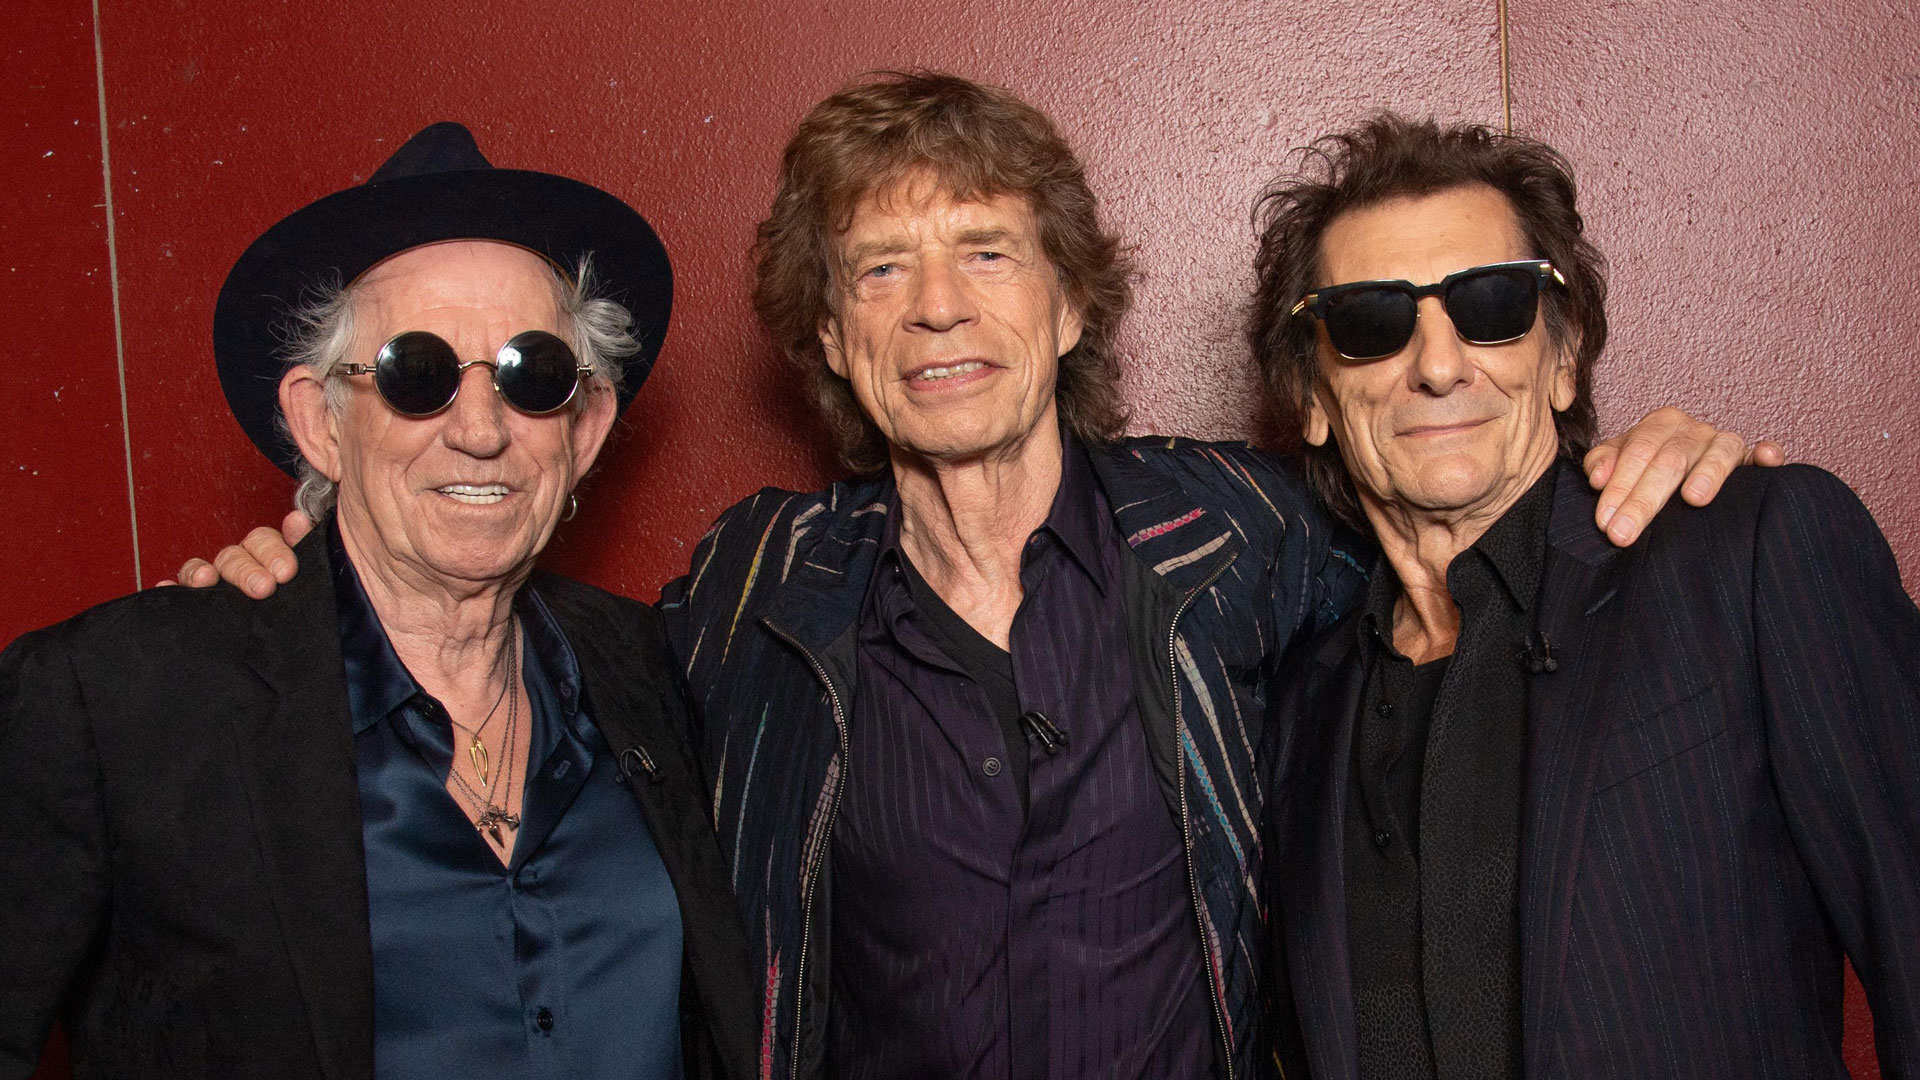 Rolling Stones remind us rockers weren't meant to be role models